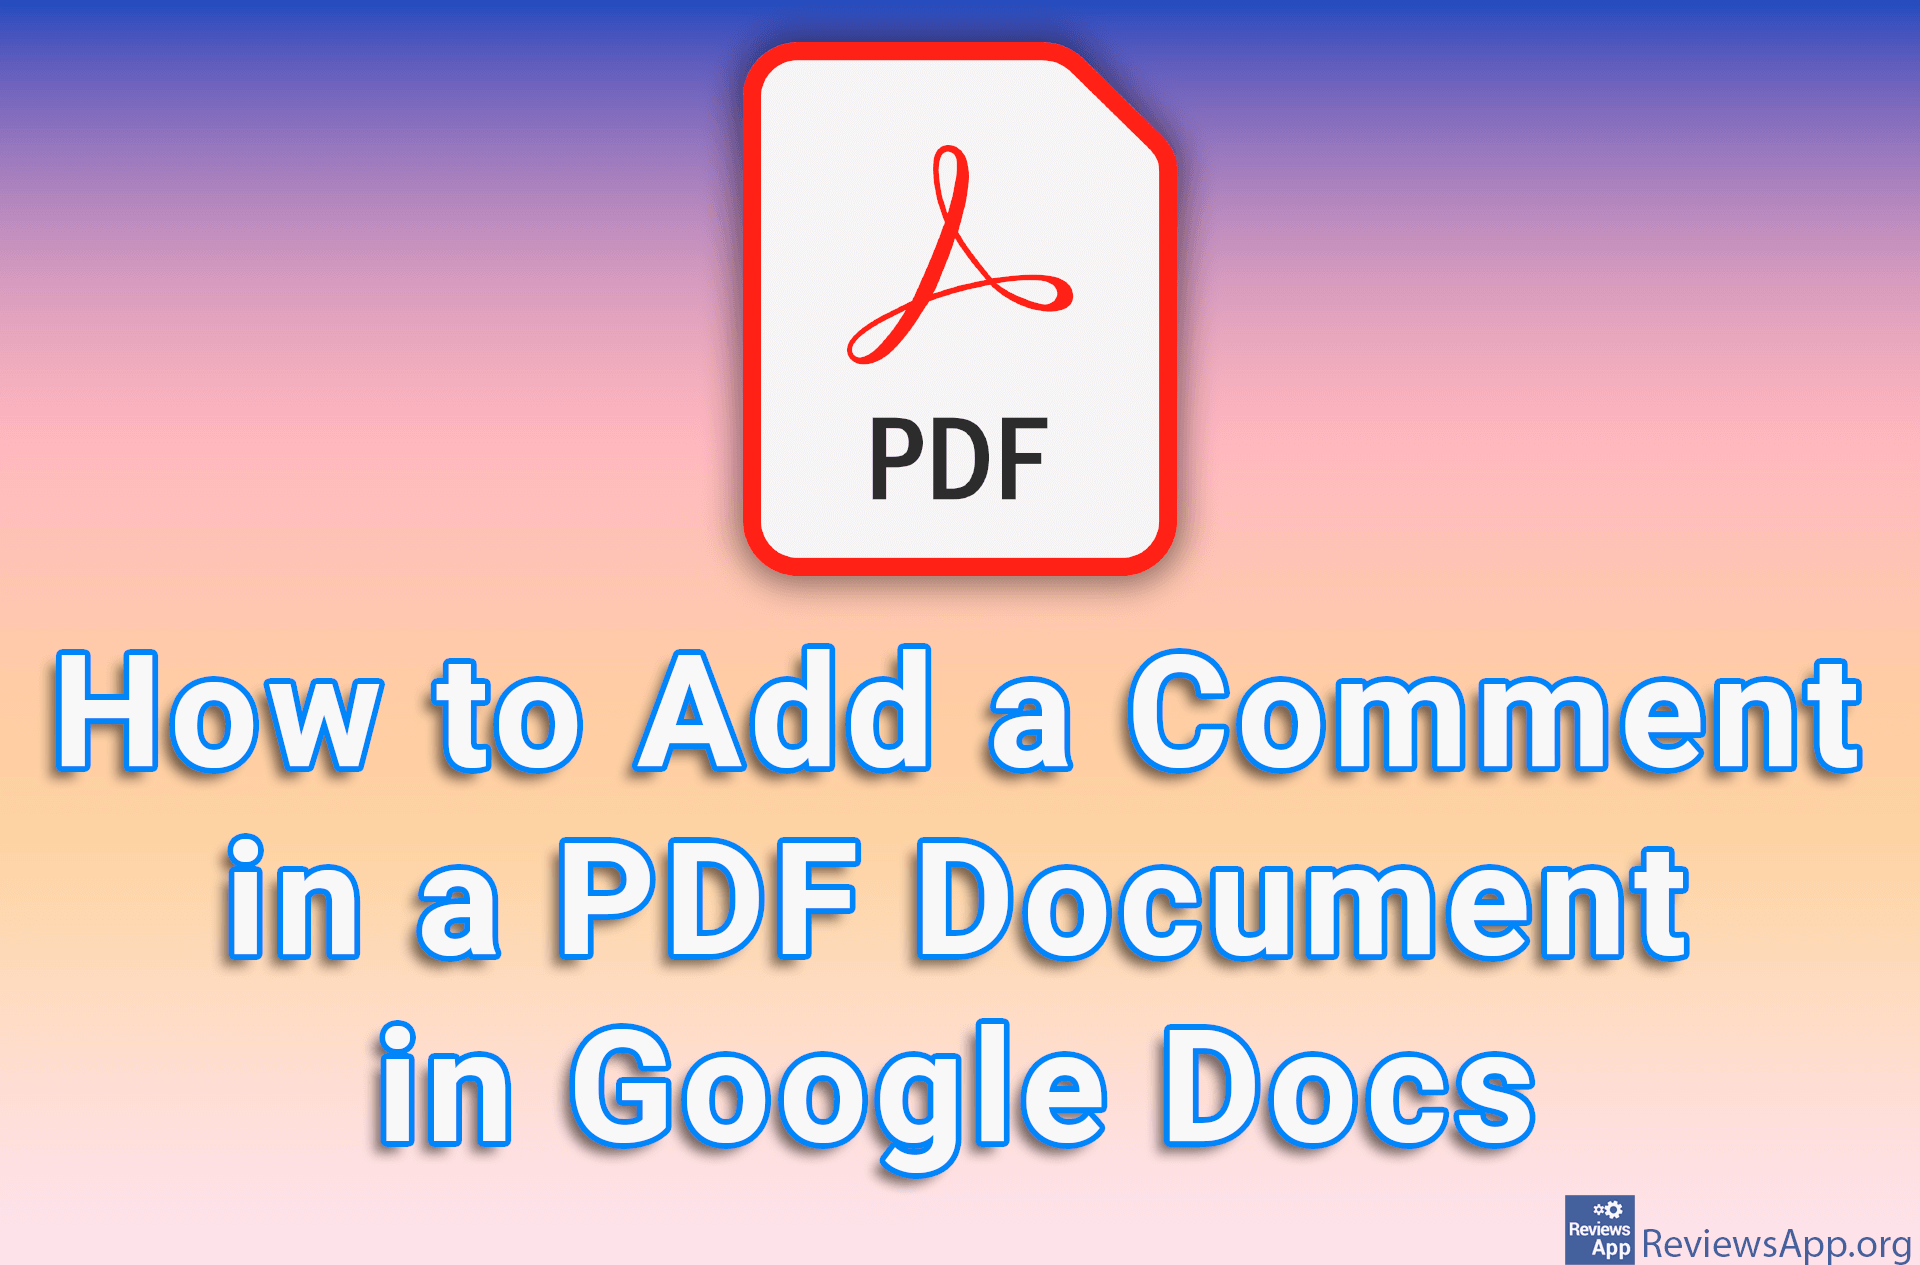 How to Add a Comment in a PDF Document in Google Docs